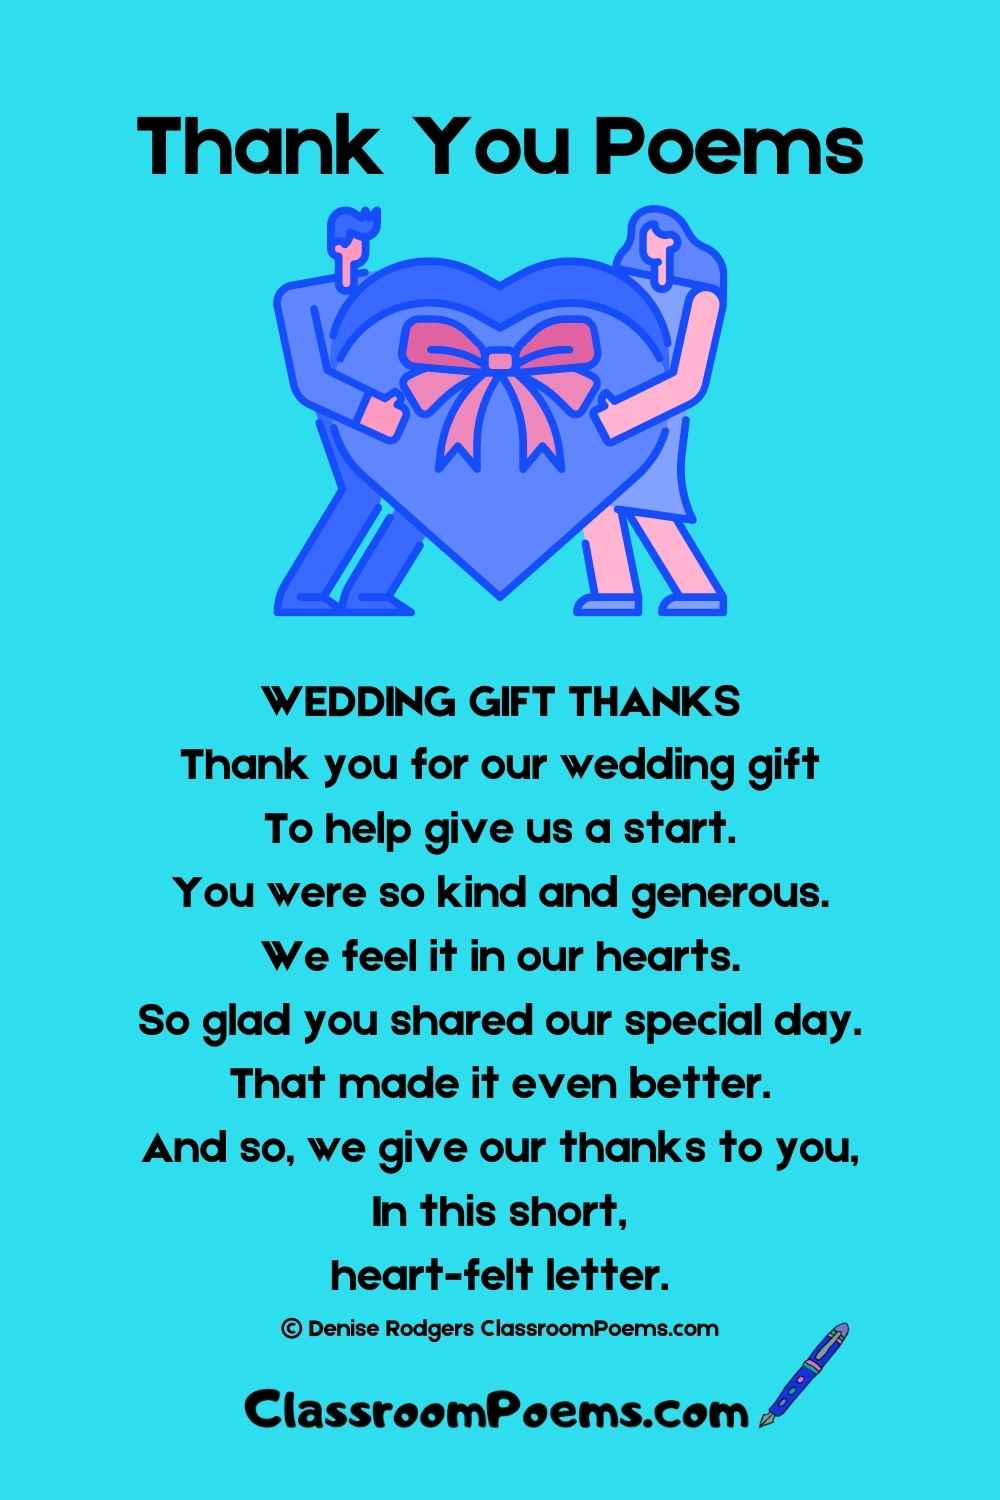 Thank You poem for wedding gift.